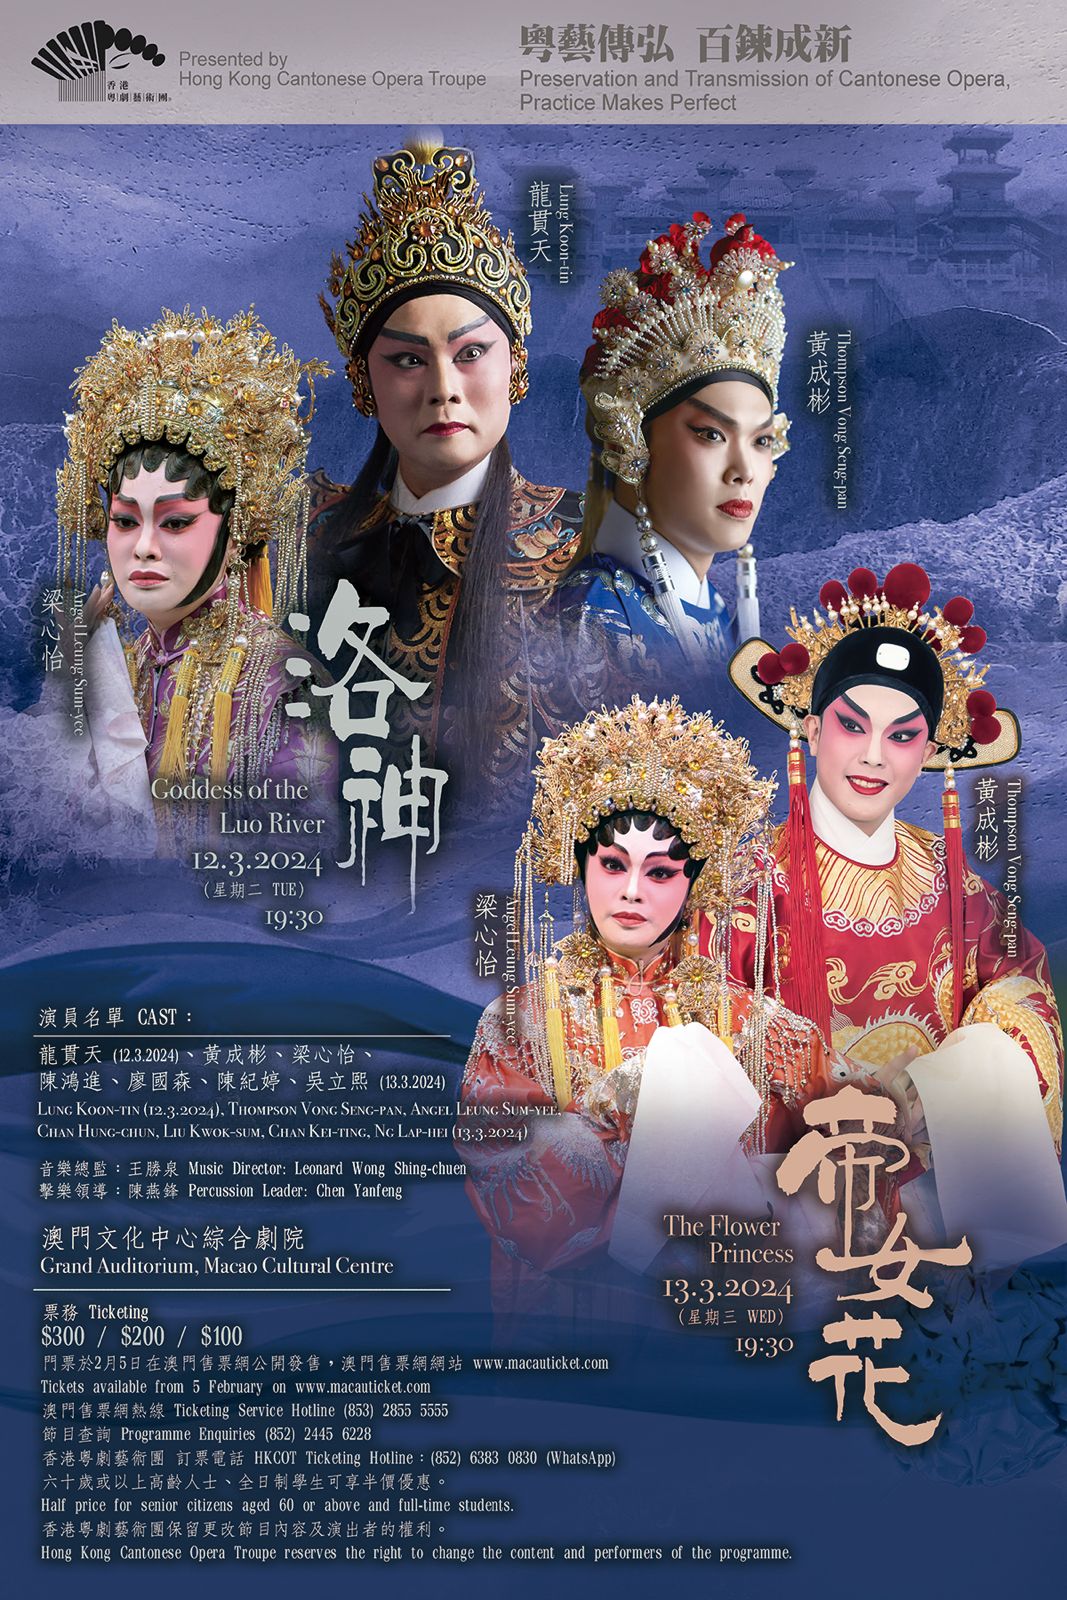 Preservation and Transmission of Cantonese Opera, Practice Makes Perfect                   “Goddess of the Luo River”,“The Flower Princess”Presented by Hong Kong Cantonese Opera Troupe